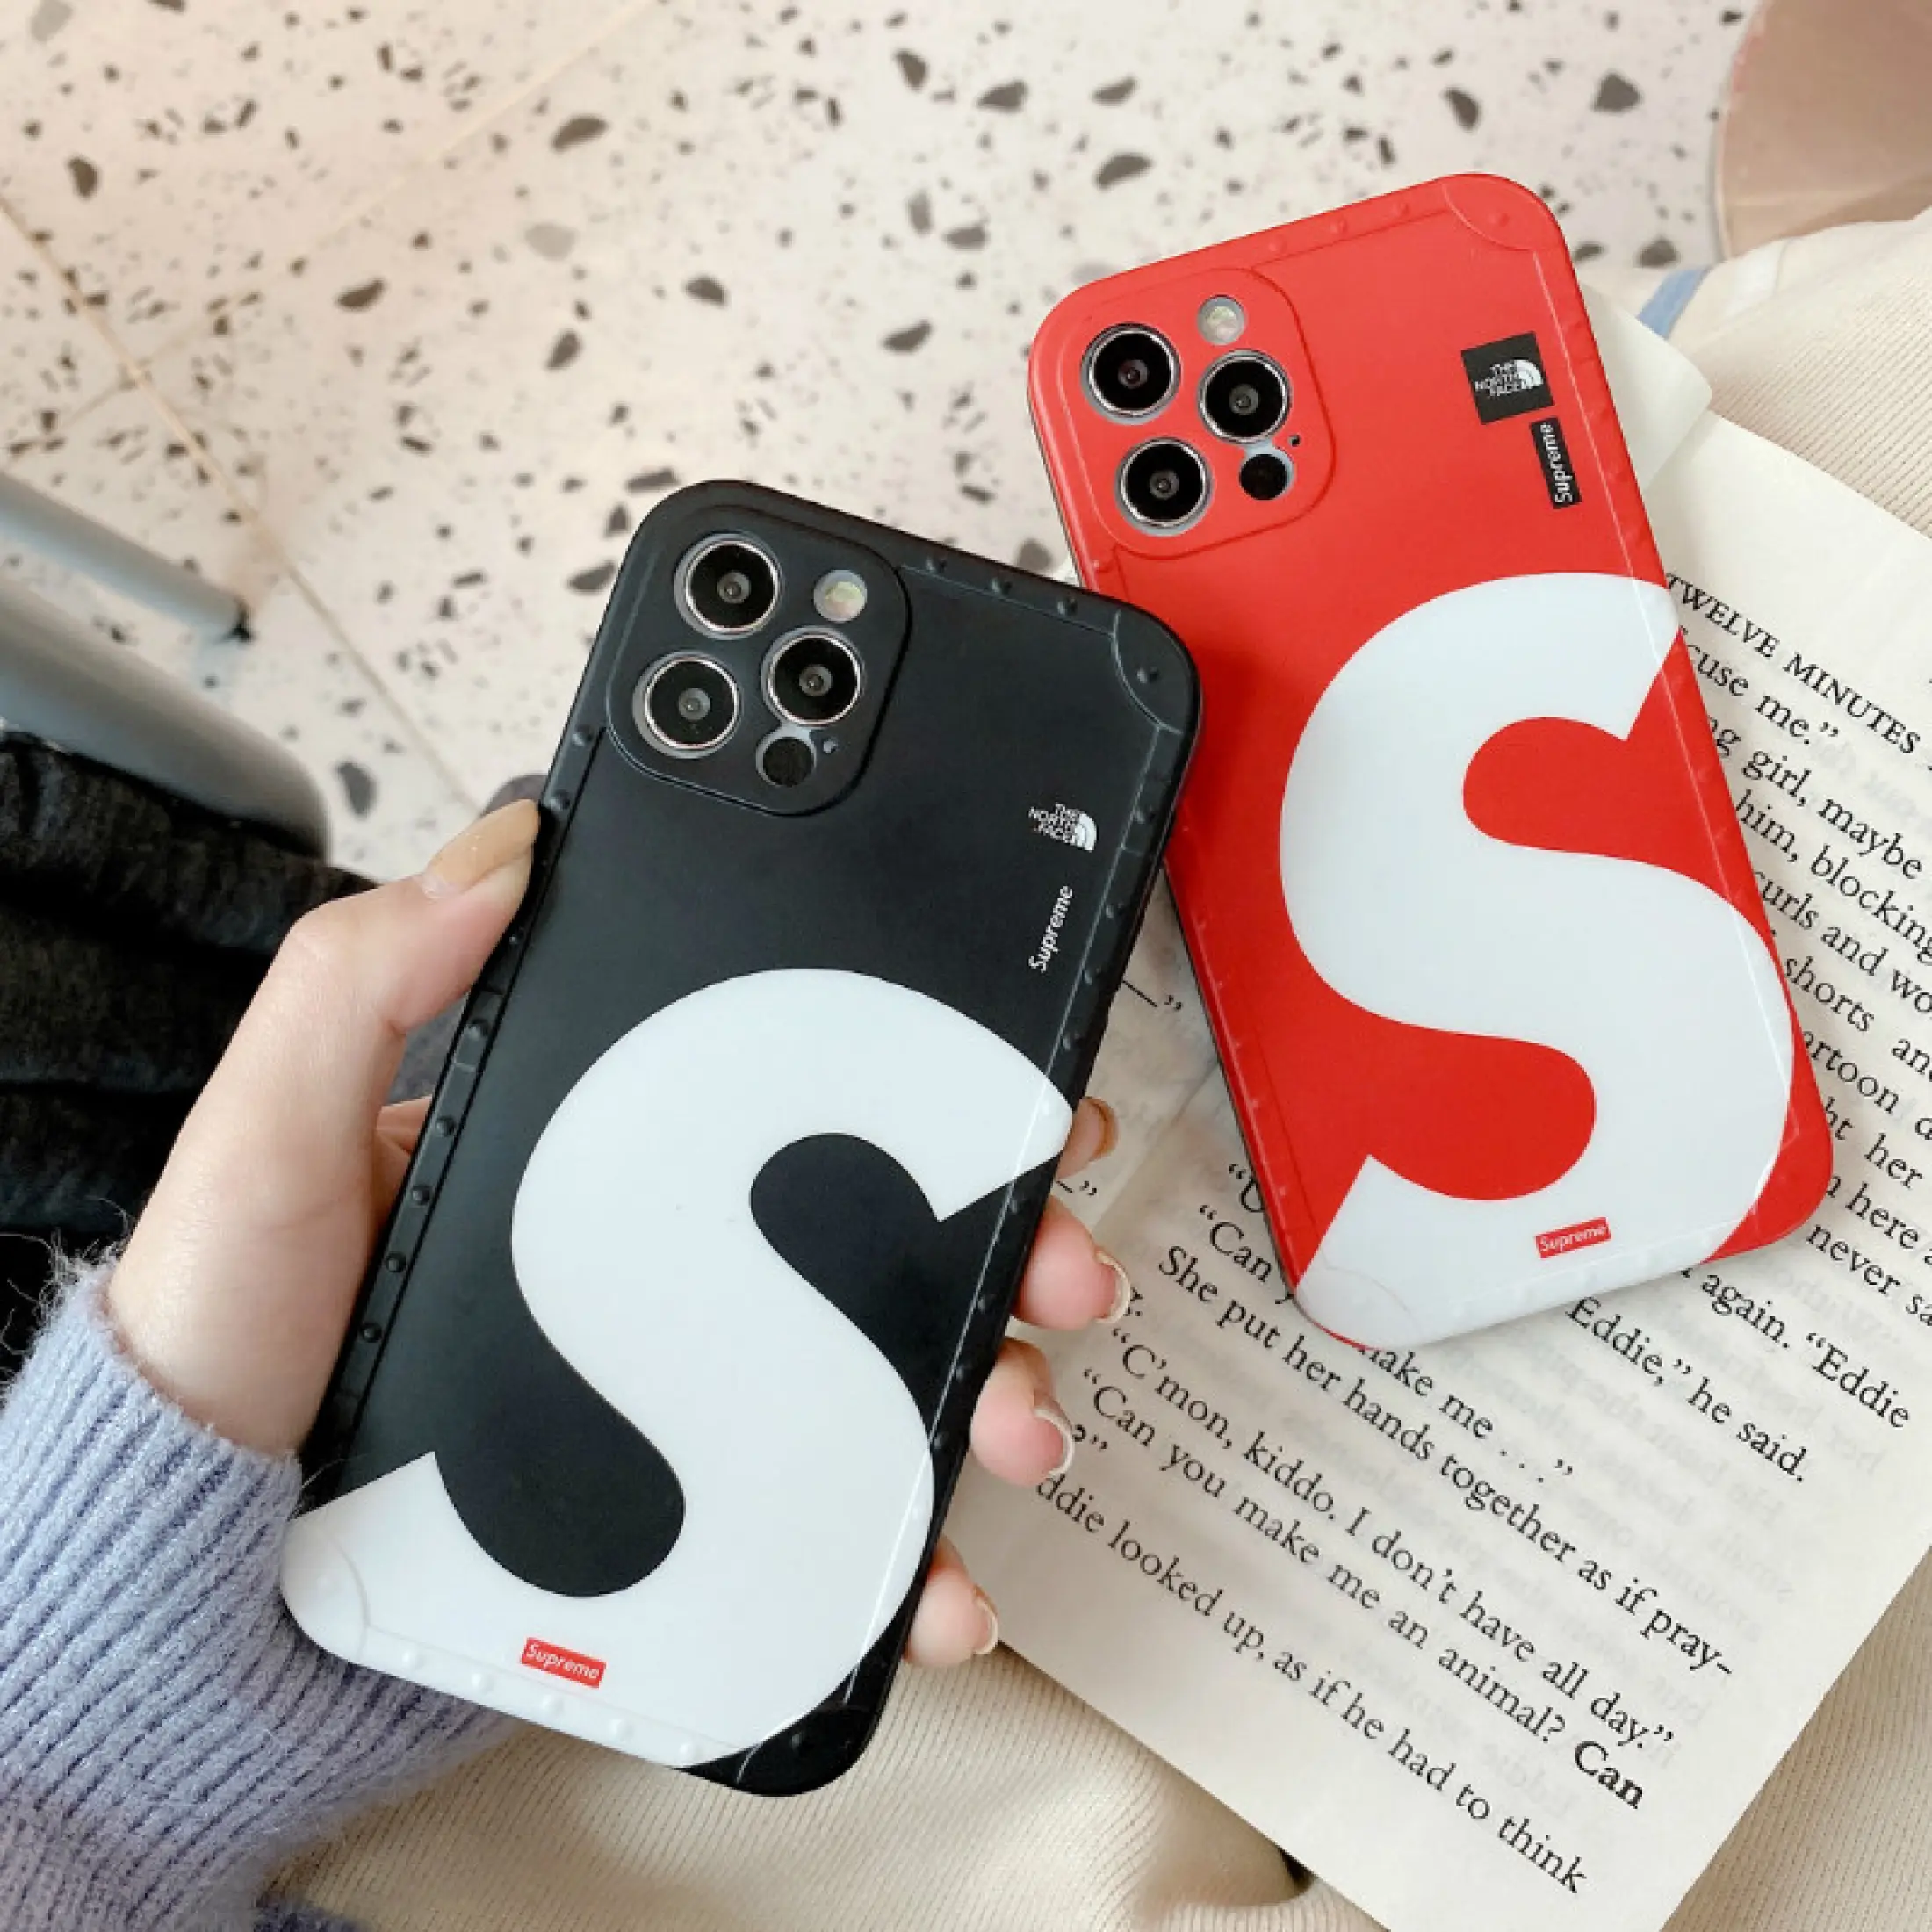 Supreme And North Face New Silicone Iphone Case For Iphone 12 Pro Max Mini 11 Pro Max Xs Max Xr Xs 7 8 Plus Se Soft Accurate Protection Of Camera Cover Lazada Ph